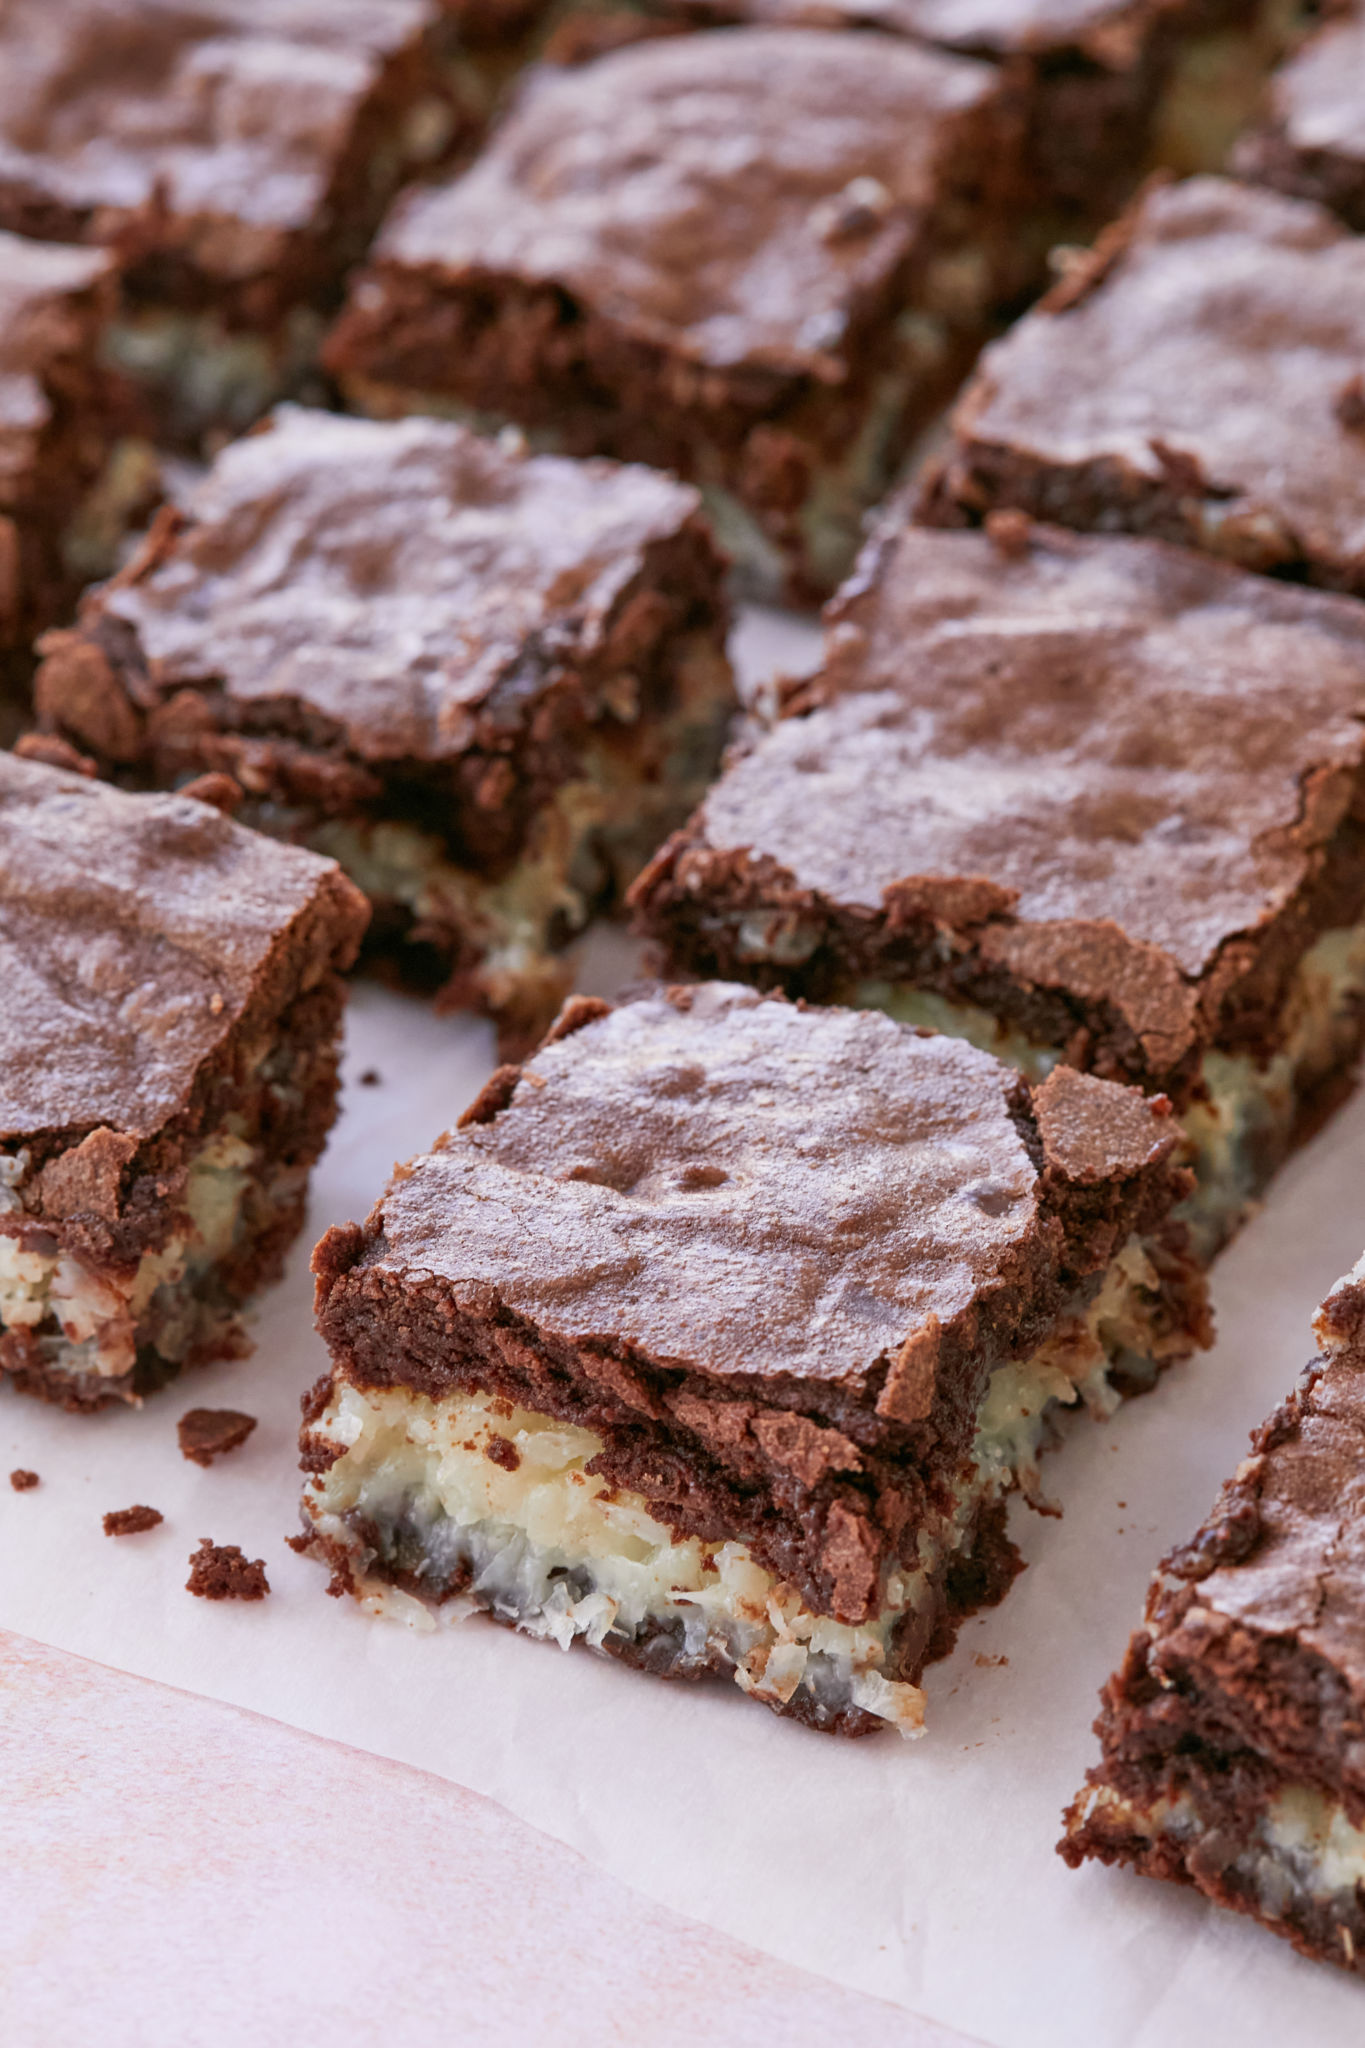 A close-up image shows the chewy layer of coconut macaroon stuffed in two layers of brownies.